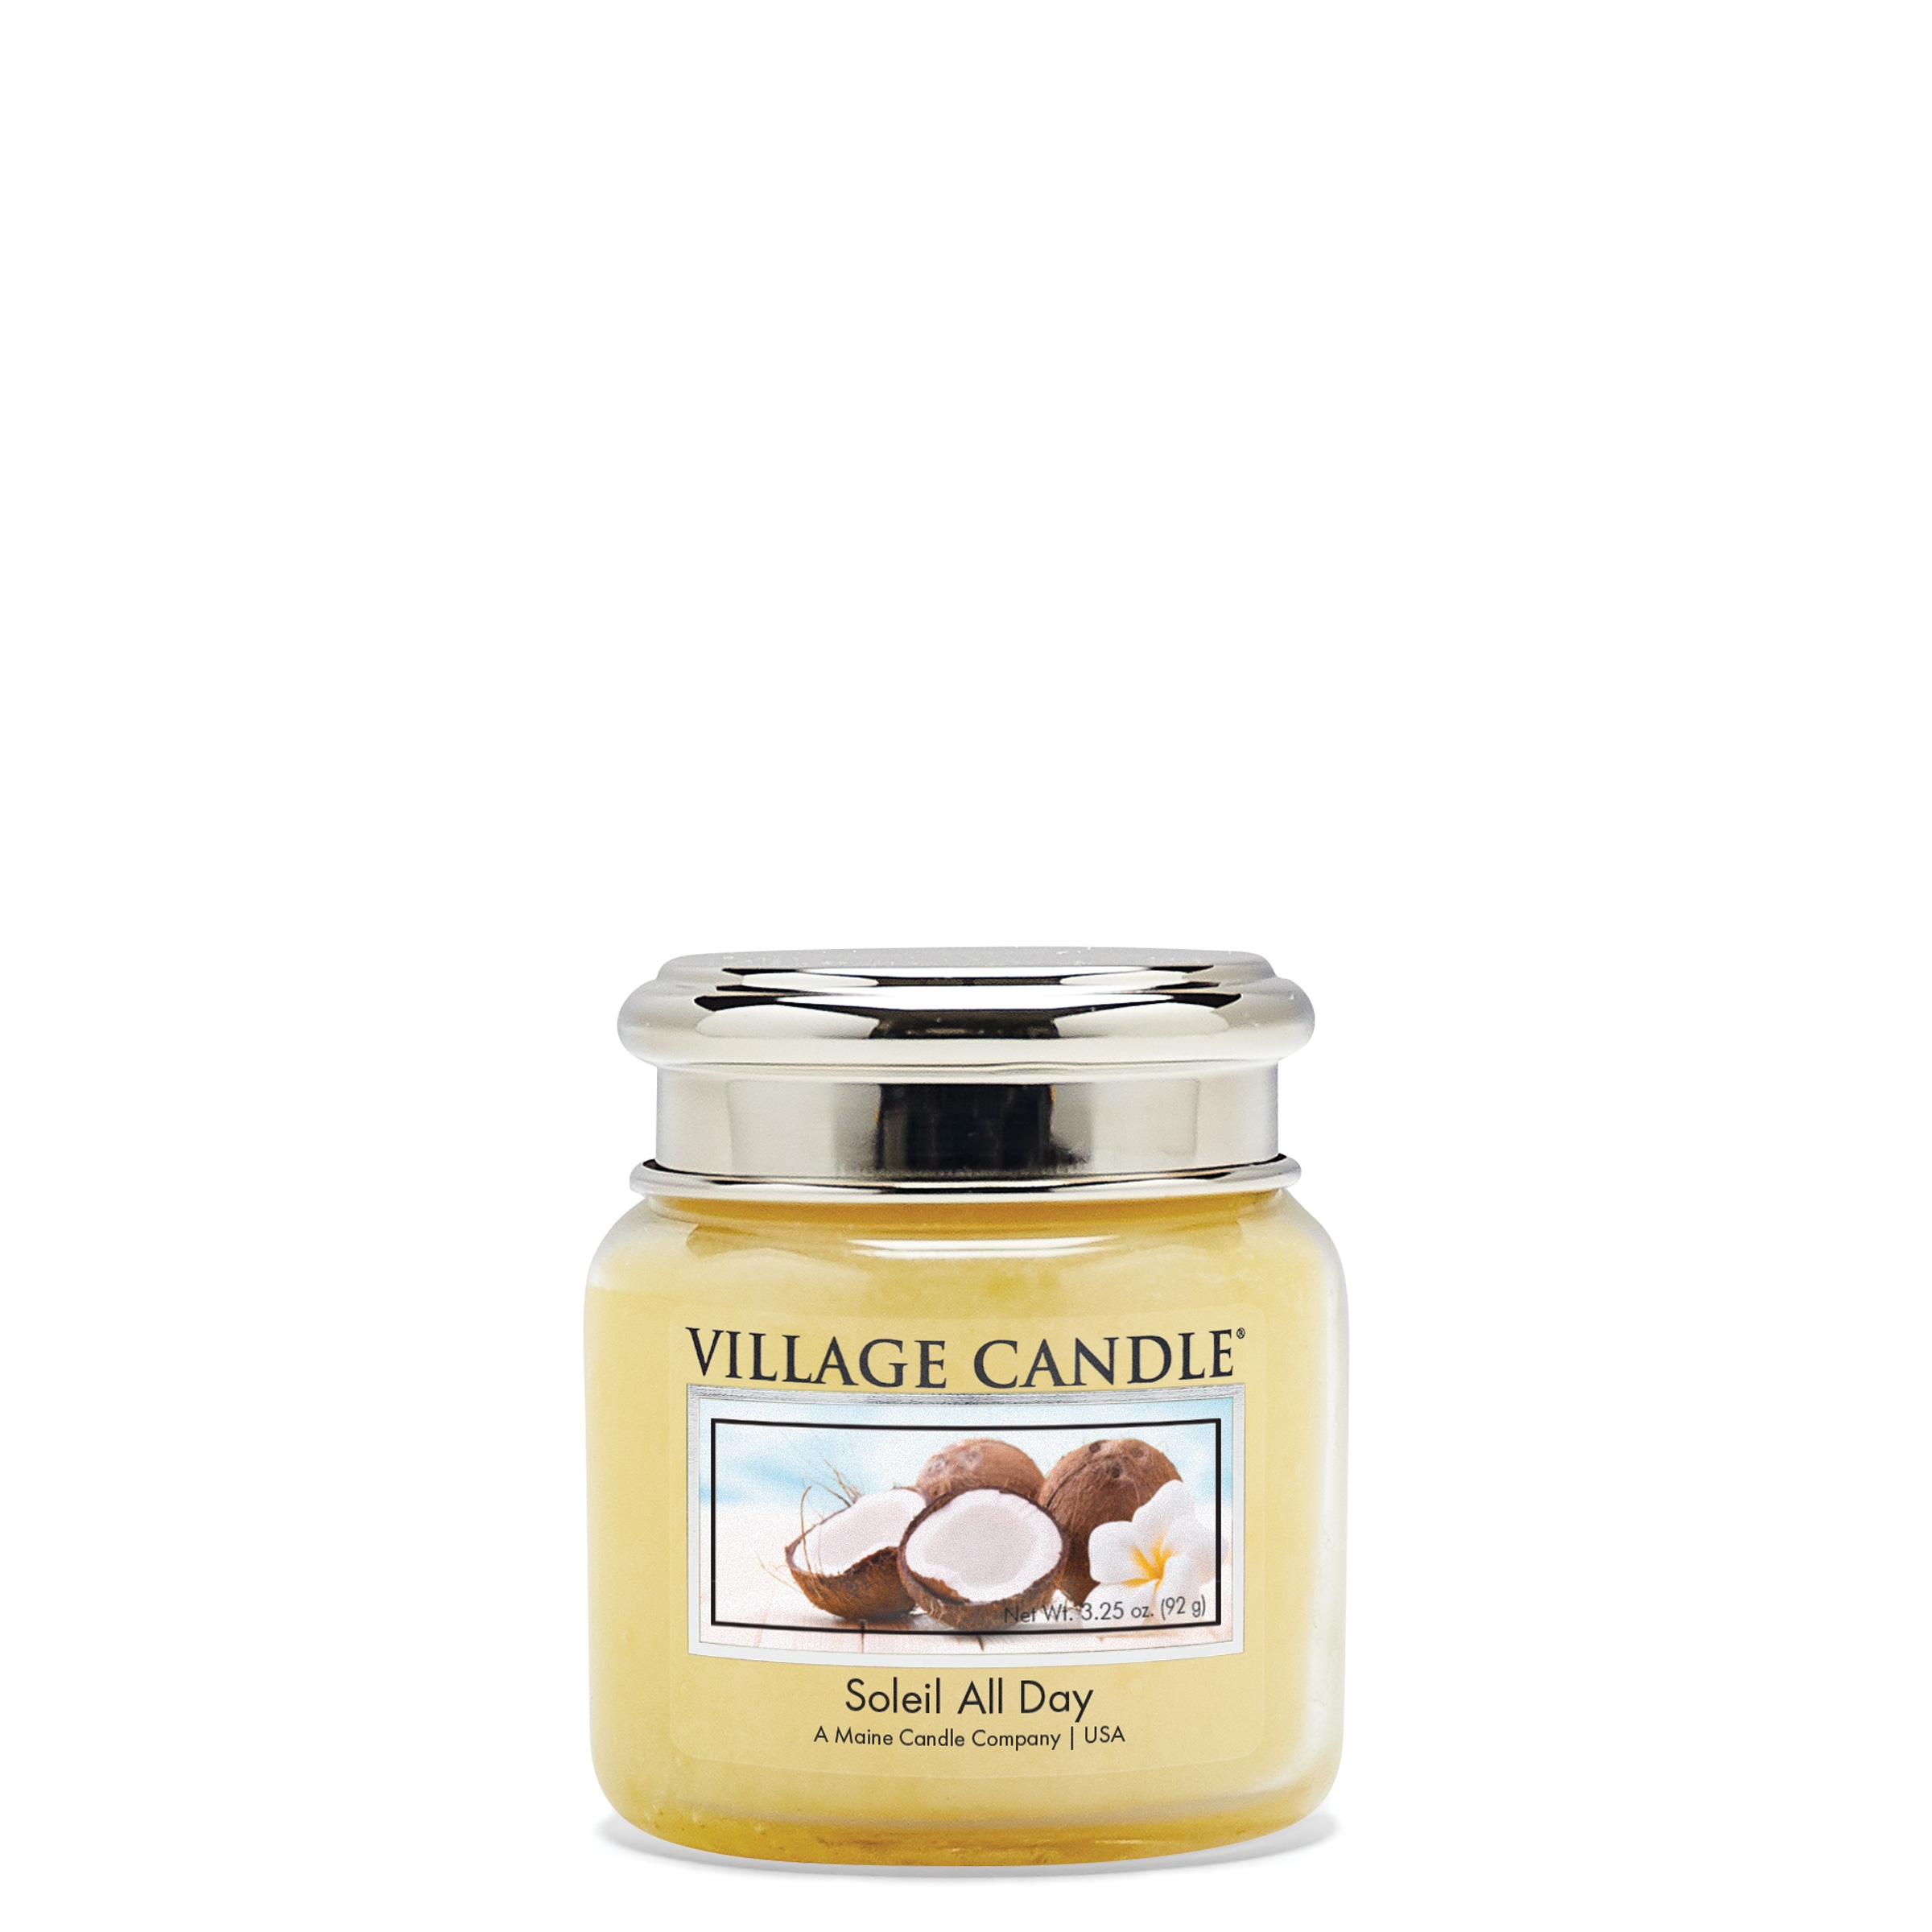 Soleil All Day 3.75 oz bocal Village Candle